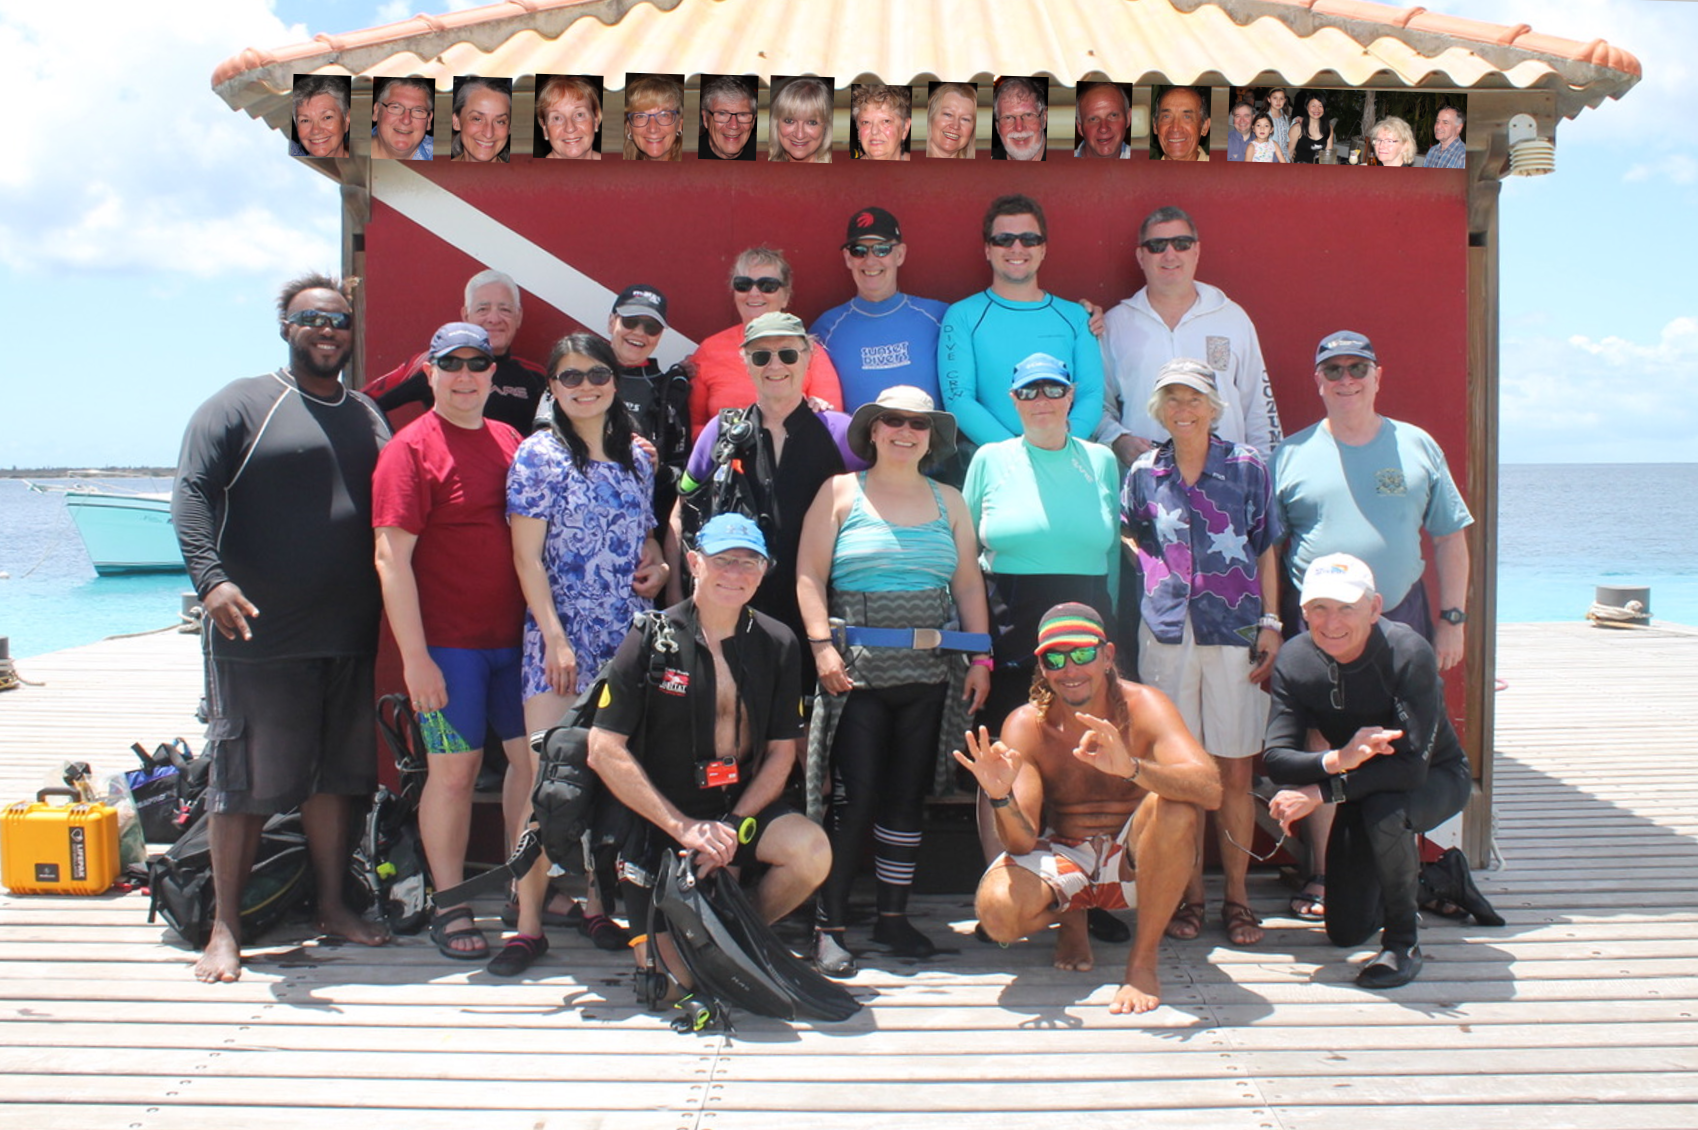 HHUC in Bonaire 2020: some of the divers on dock with the others in portrait under the roofline - photo credit: Bob Belcher, NAUI 3836